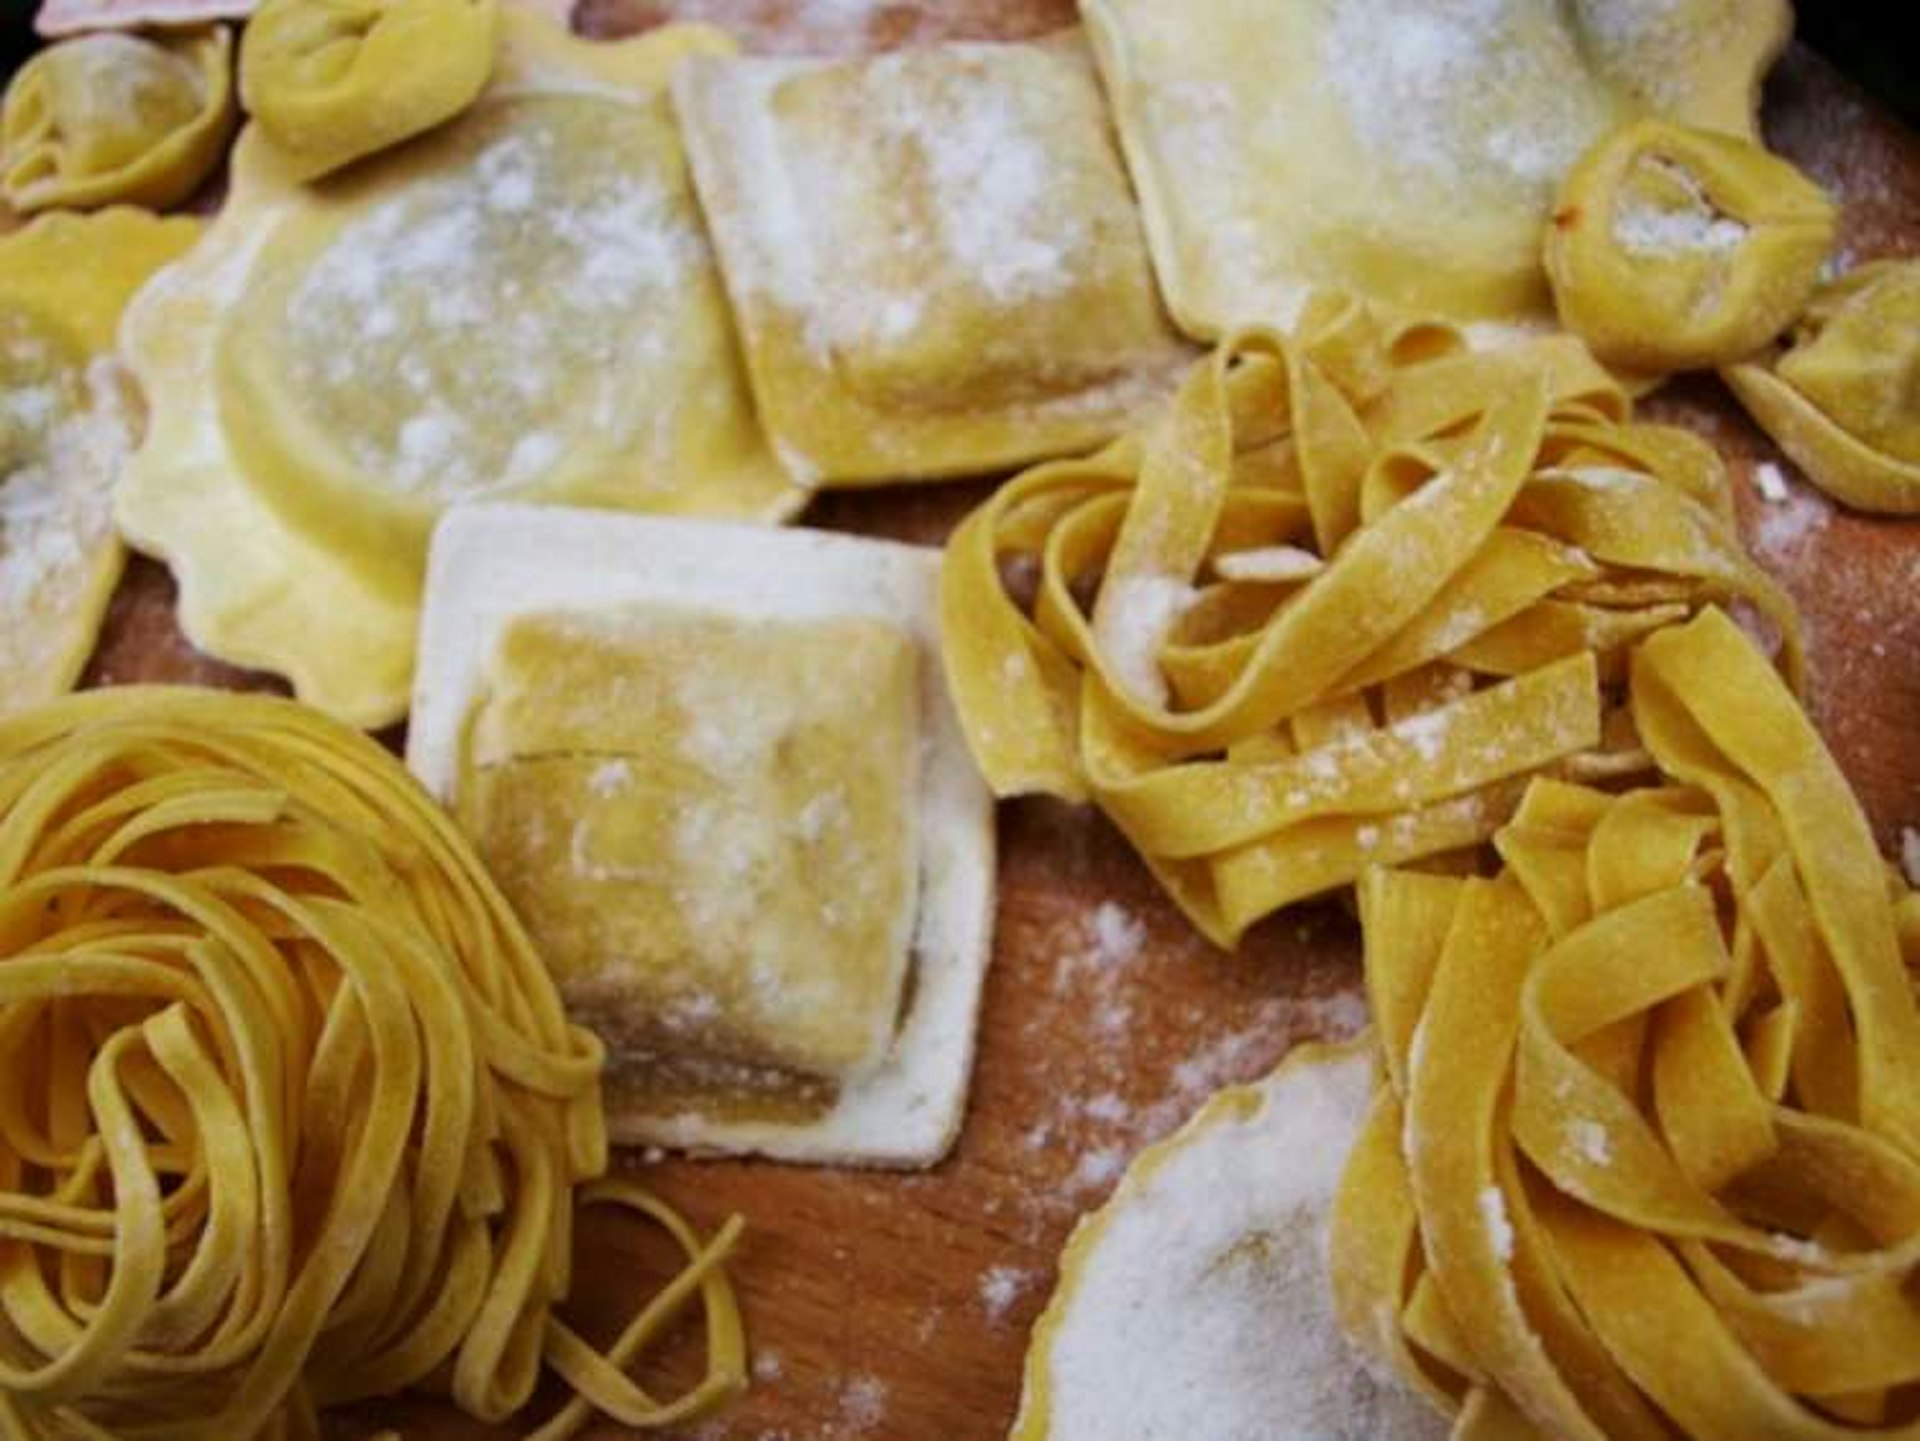 Fresh flour-dusted Italian pasta, tagliatelle is on the right. Image by Chris Rubberdragon / CC BY-SA 2.0